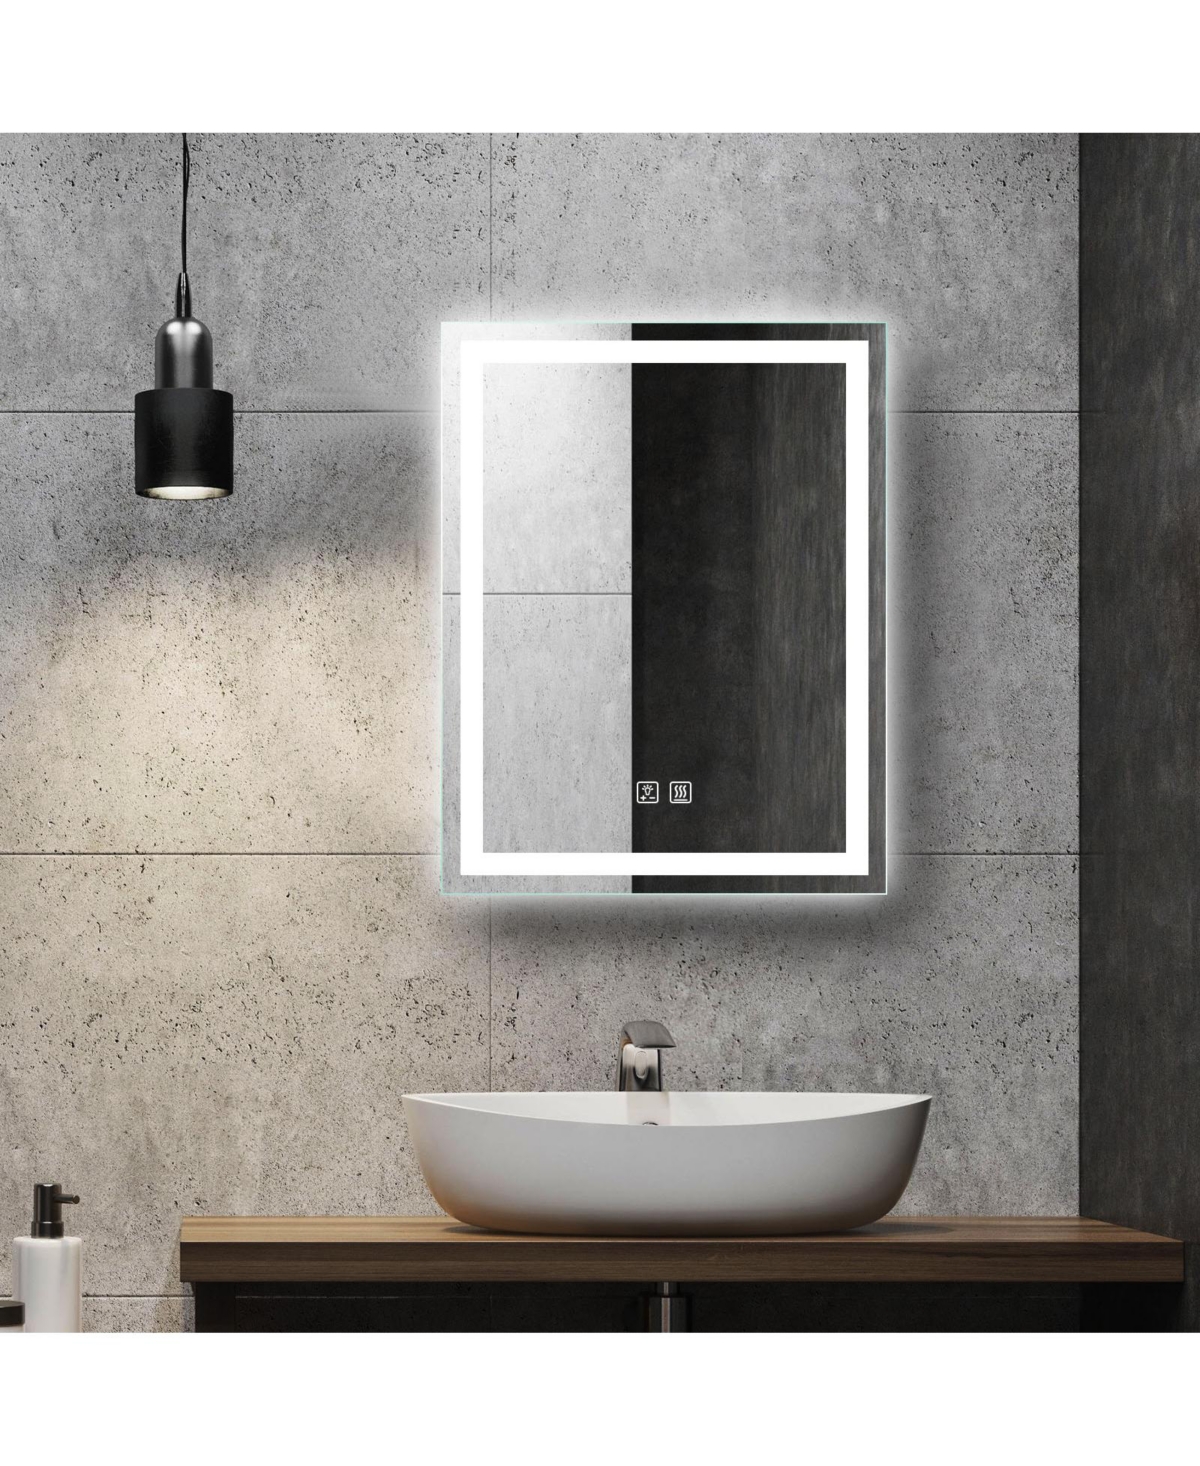 24 in. W x 30 in. H Rectangular Frameless Led Light with 3-Color and Anti-Fog Wall Mounted Bathroom Vanity Mirror - Silver